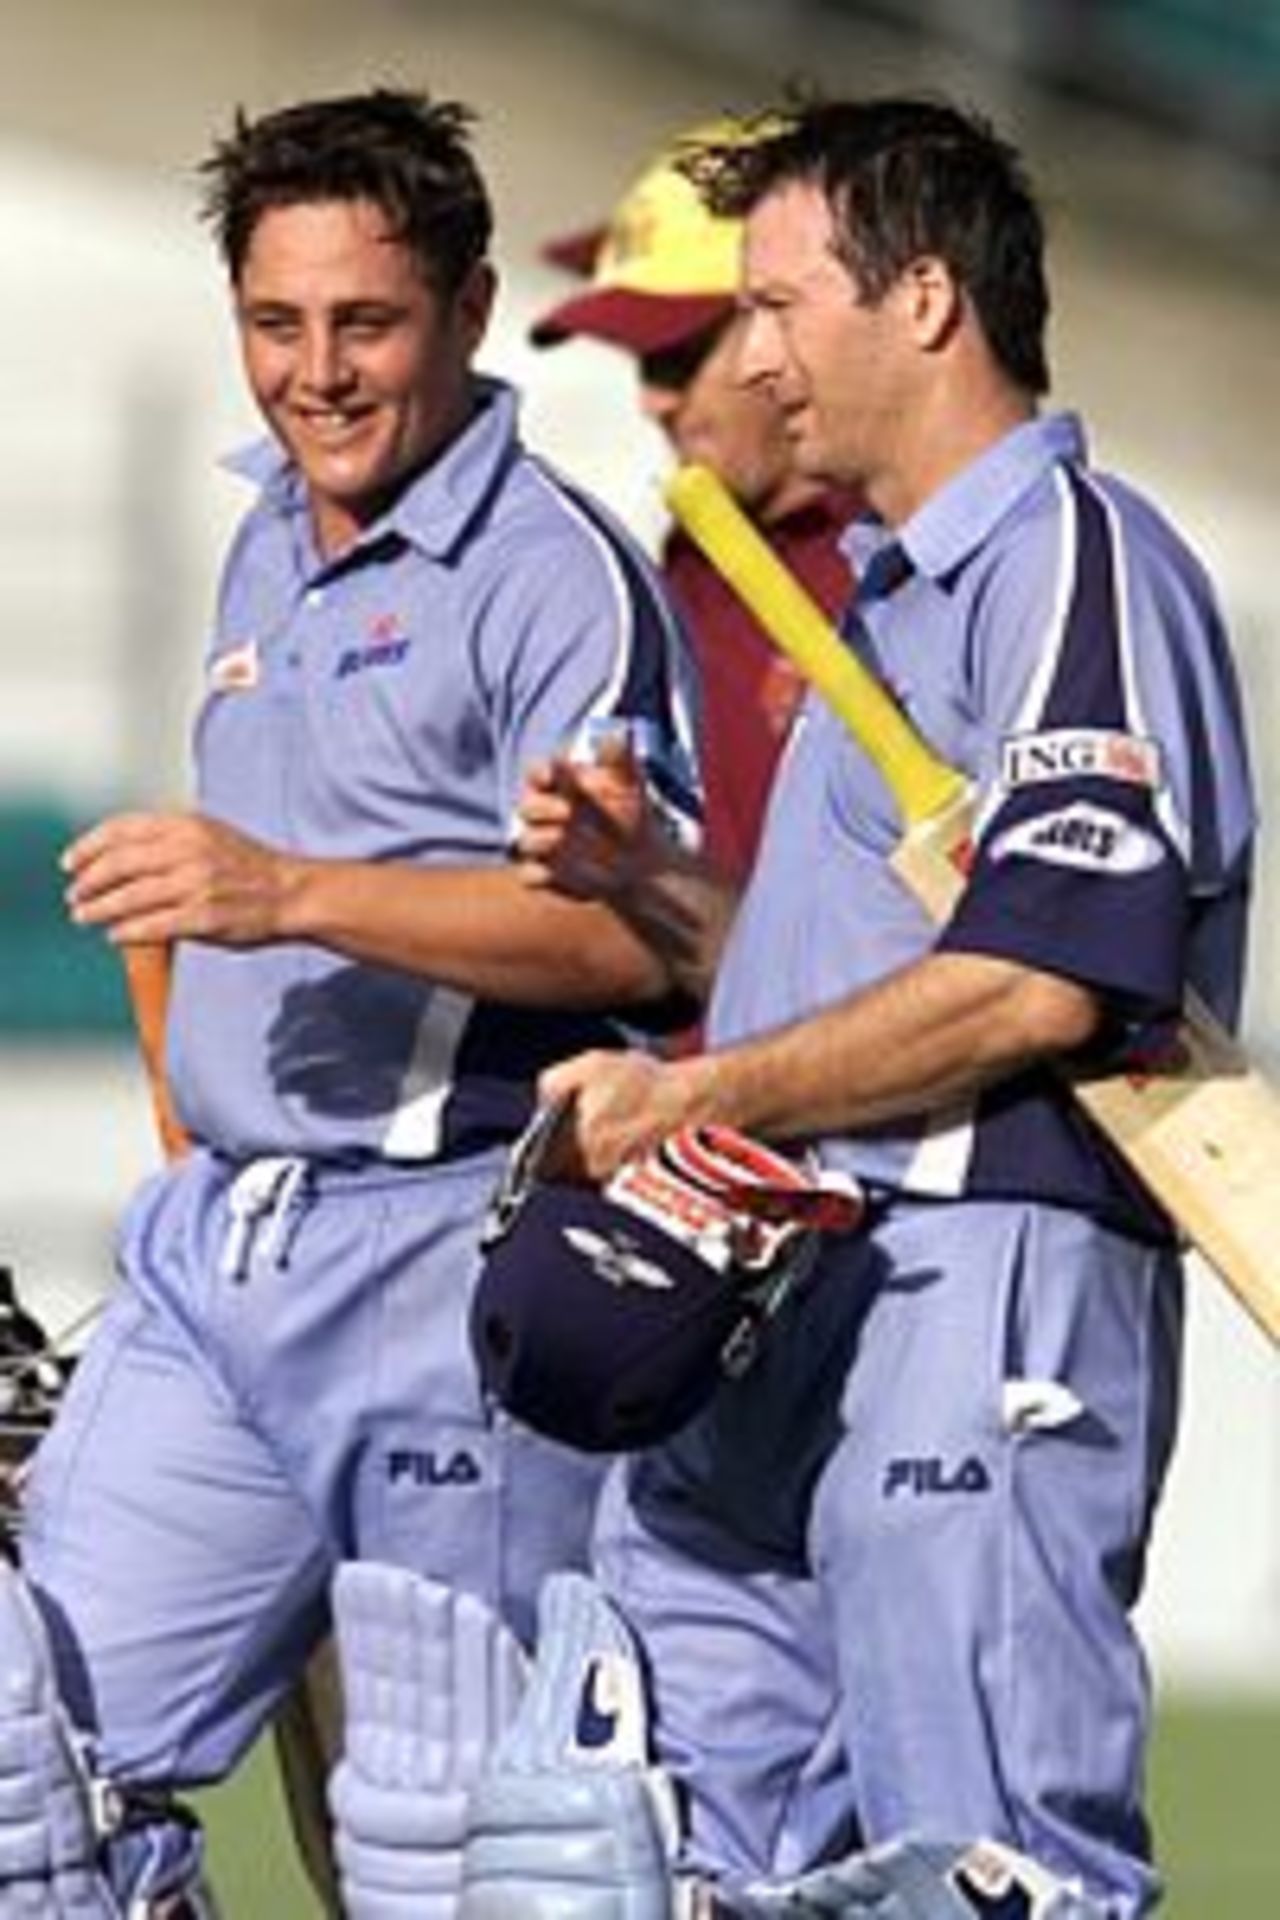 18 Nov 2001: Mark Higgs (63) and Steve Waugh (101) of NSW celebrate their victory in the ING Cup match between the NSW Blues and the Queensland Bulls held at the Sydney Cricket Ground, Sydney, Australia. The Blues won the match by 5 wickets.